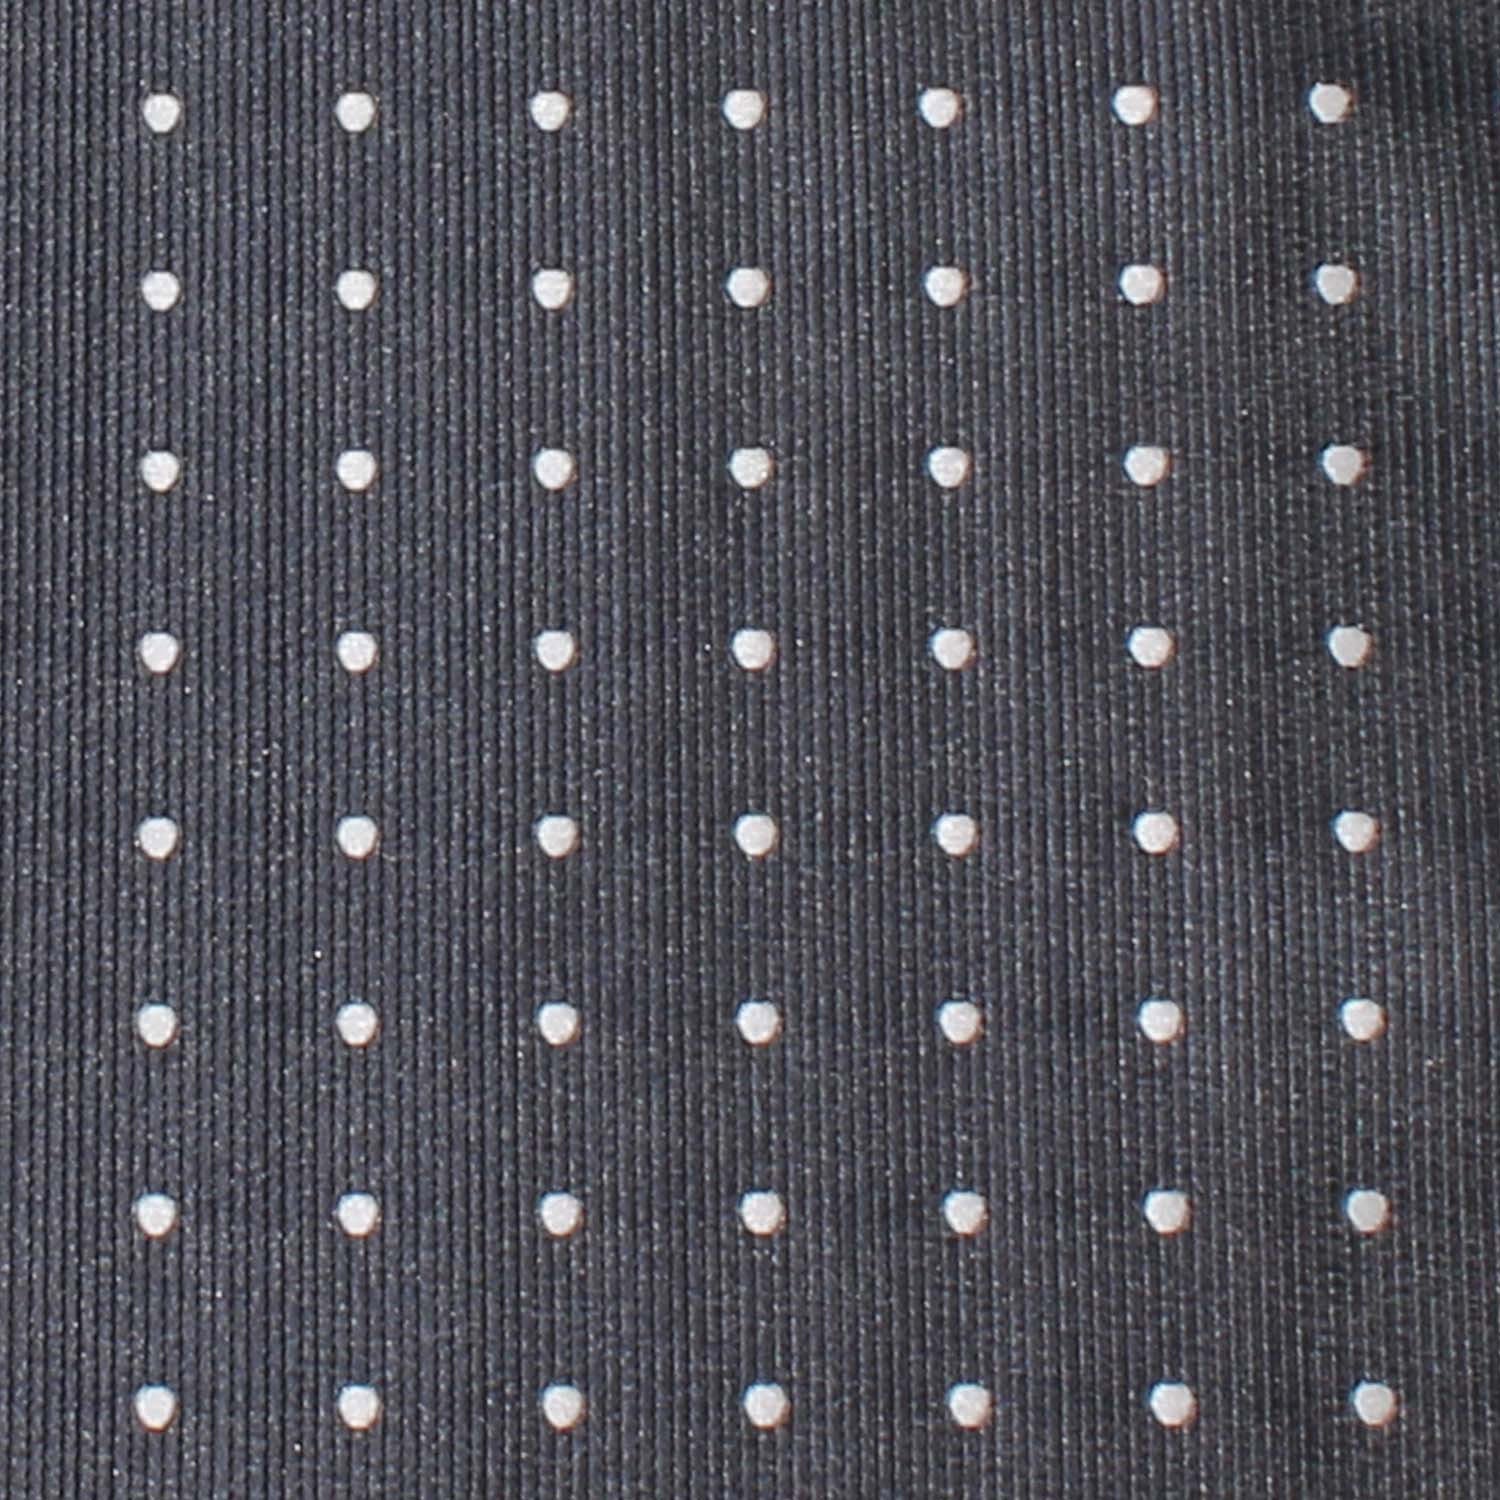 Charcoal Grey with White Polka Dots Fabric Self Tie Bow Tie M121